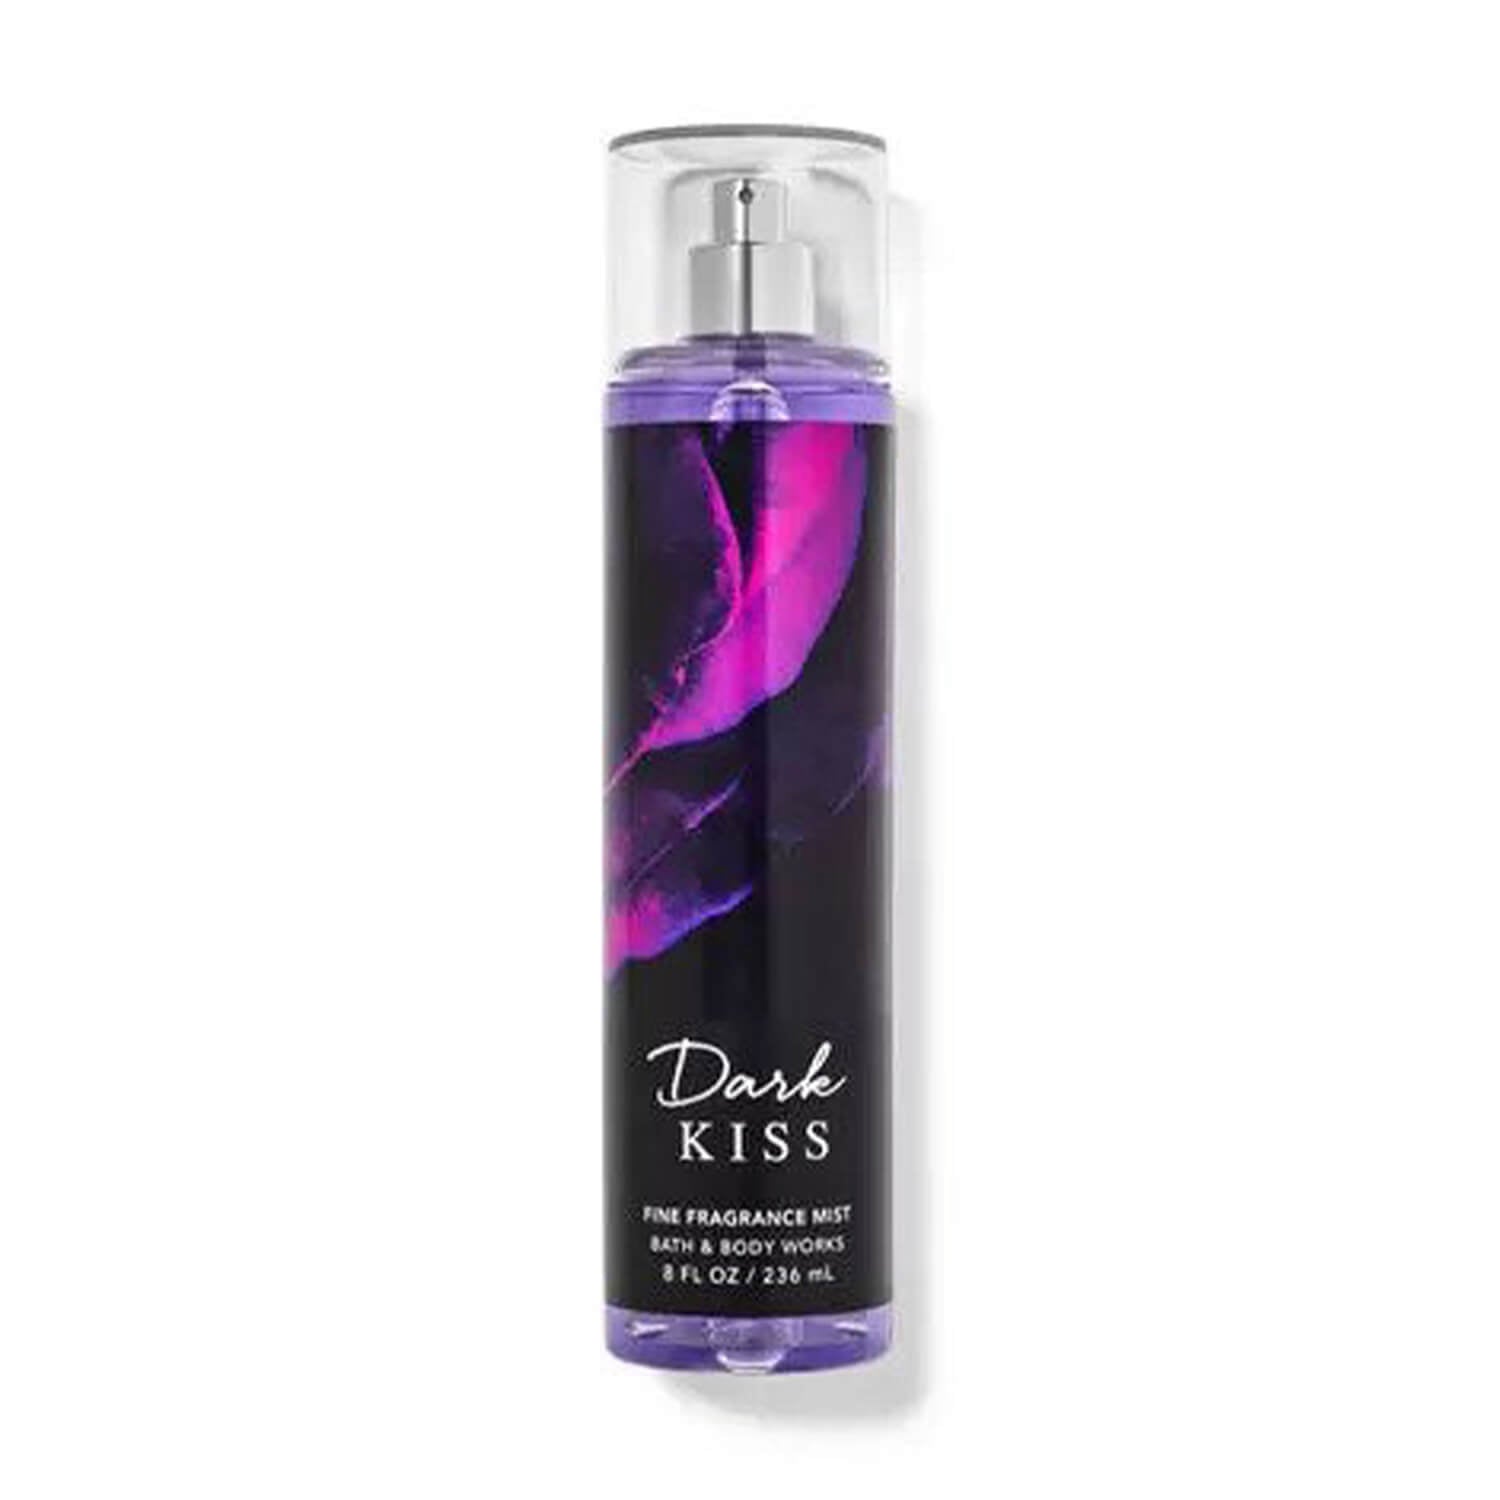 shop bath and body works mist in dark kiss fragrance available at heygirl.pk for delivery in Pakistan